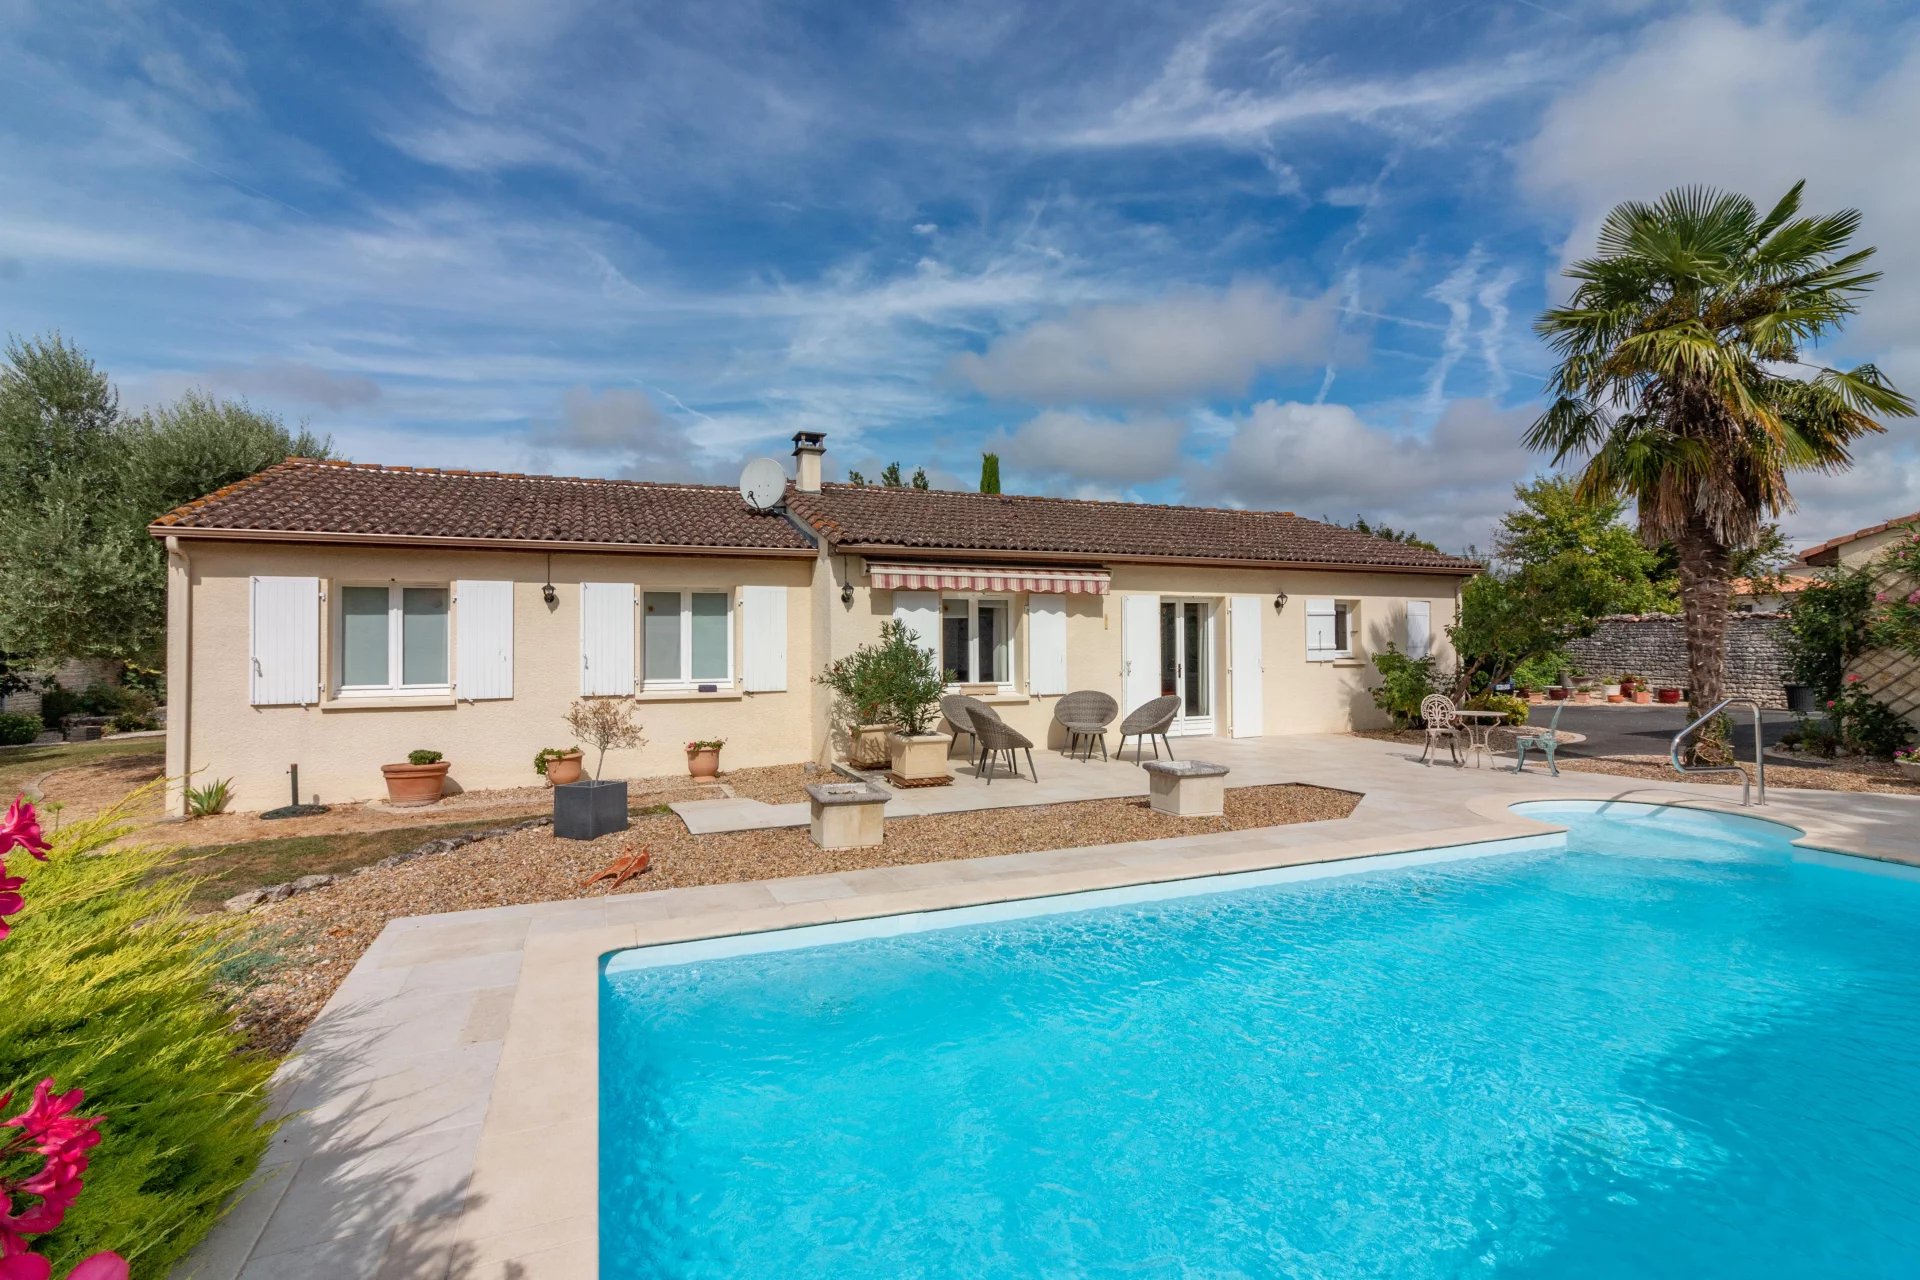 Immaculate villa with pool, walled garden and double garage